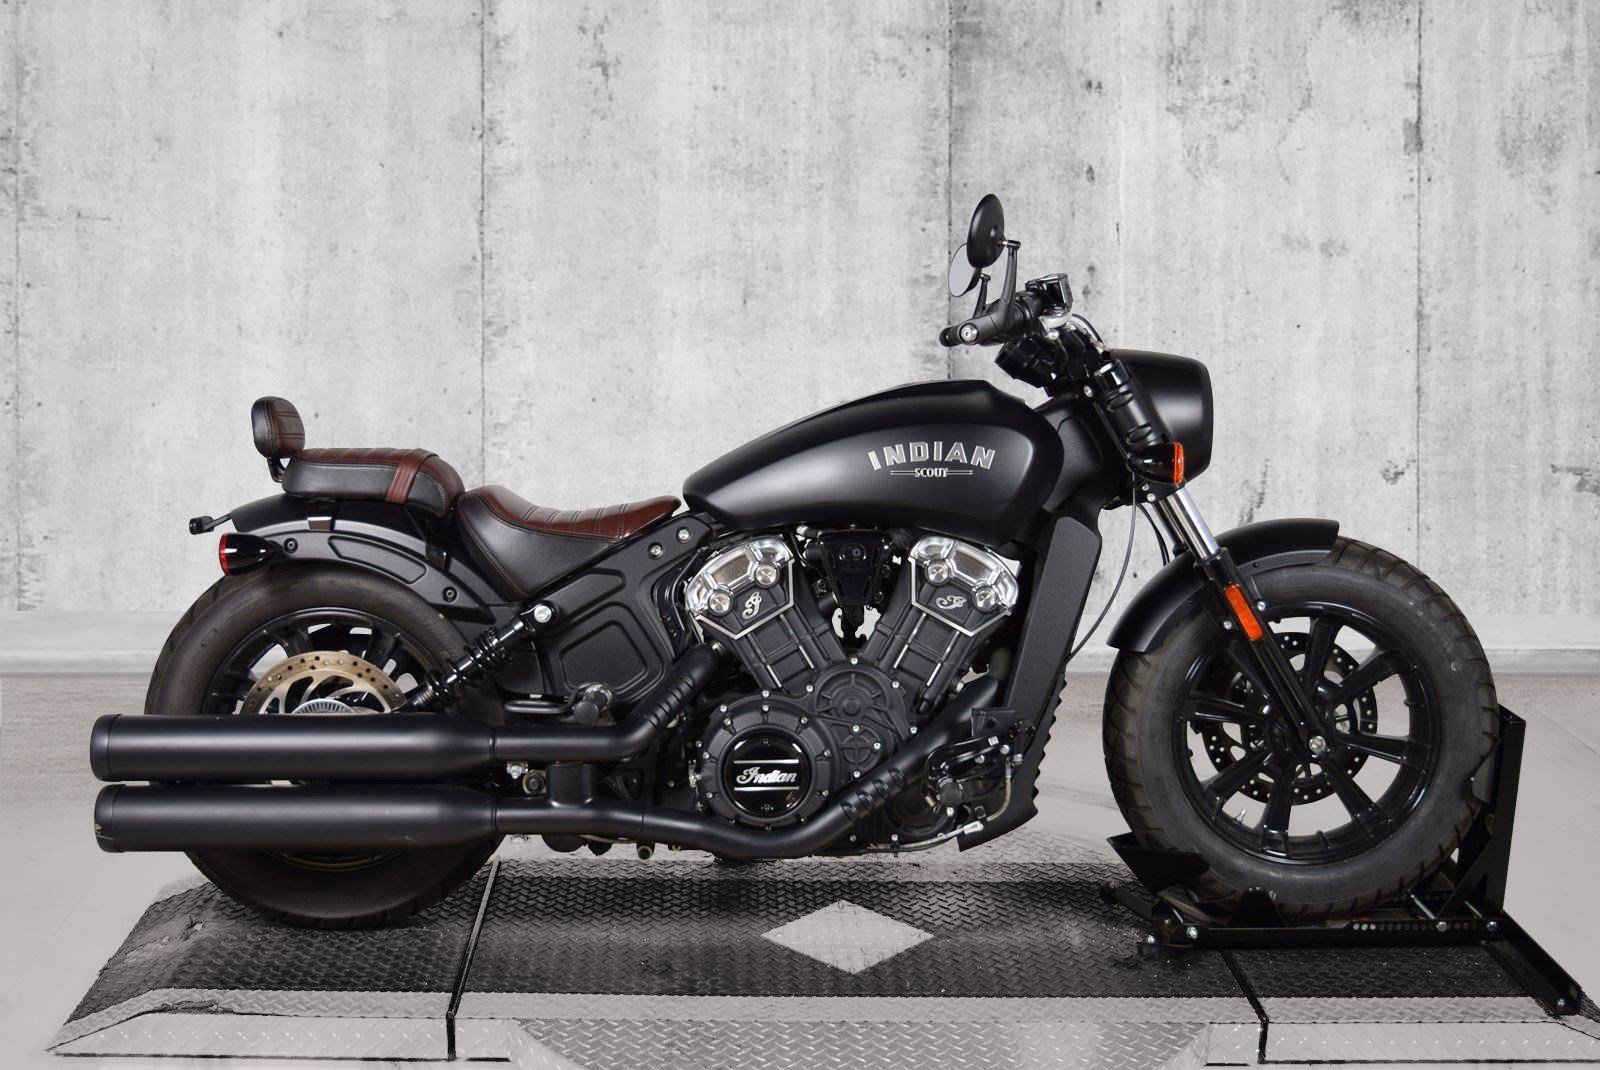 PreOwned 2019 Indian Scout Cruiser in Westminster M144144